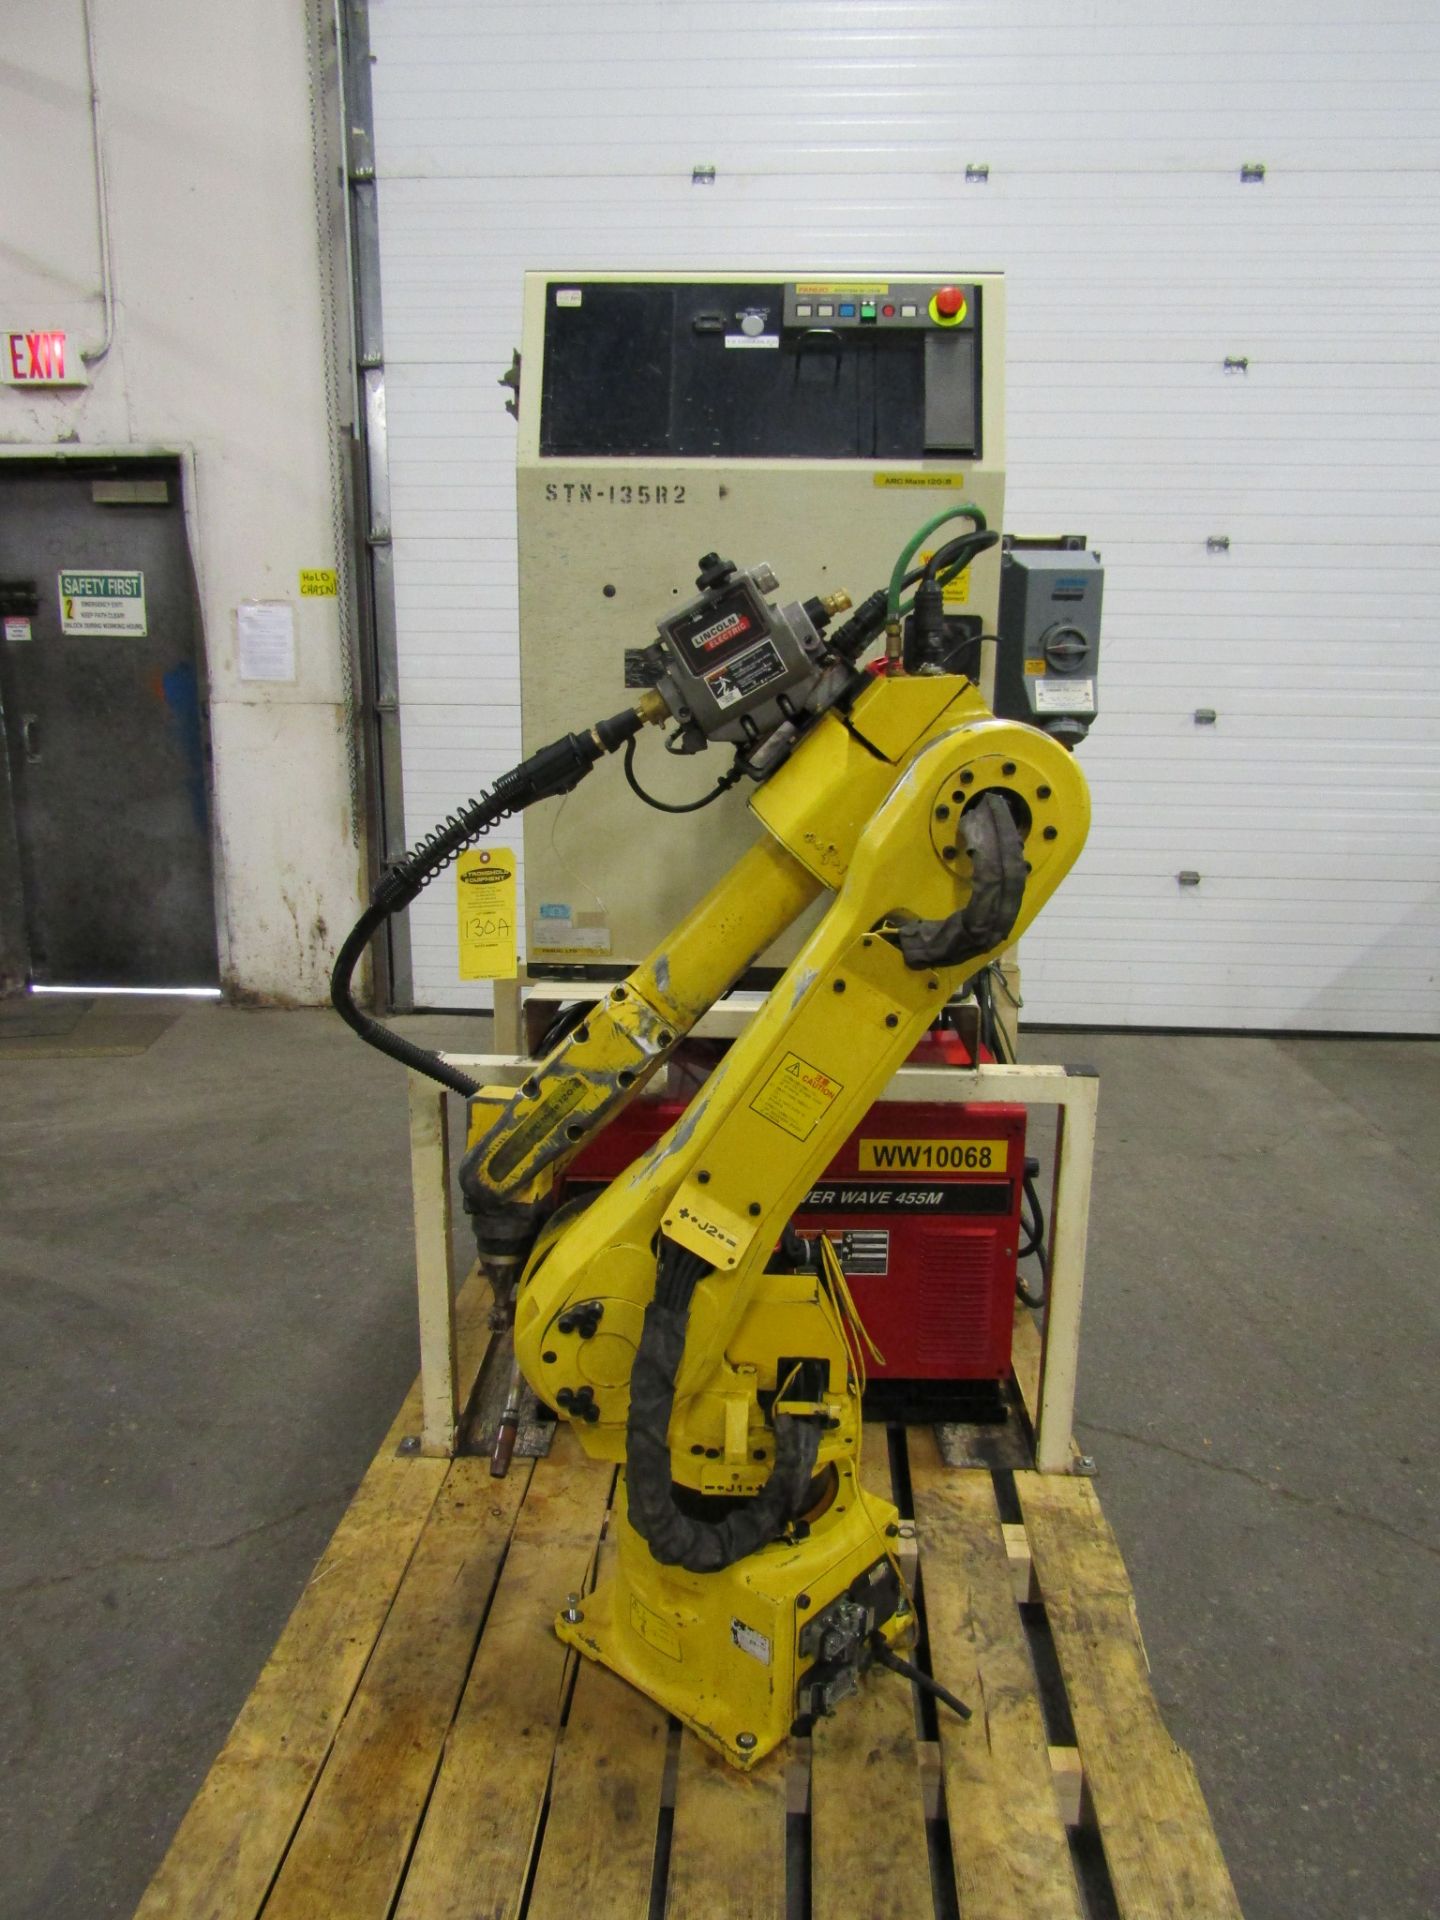 Fanuc Arcmate 120iB Welding Robot with RJ3iB Controller, teach pendant control, Lincoln Powerwave - Image 2 of 4